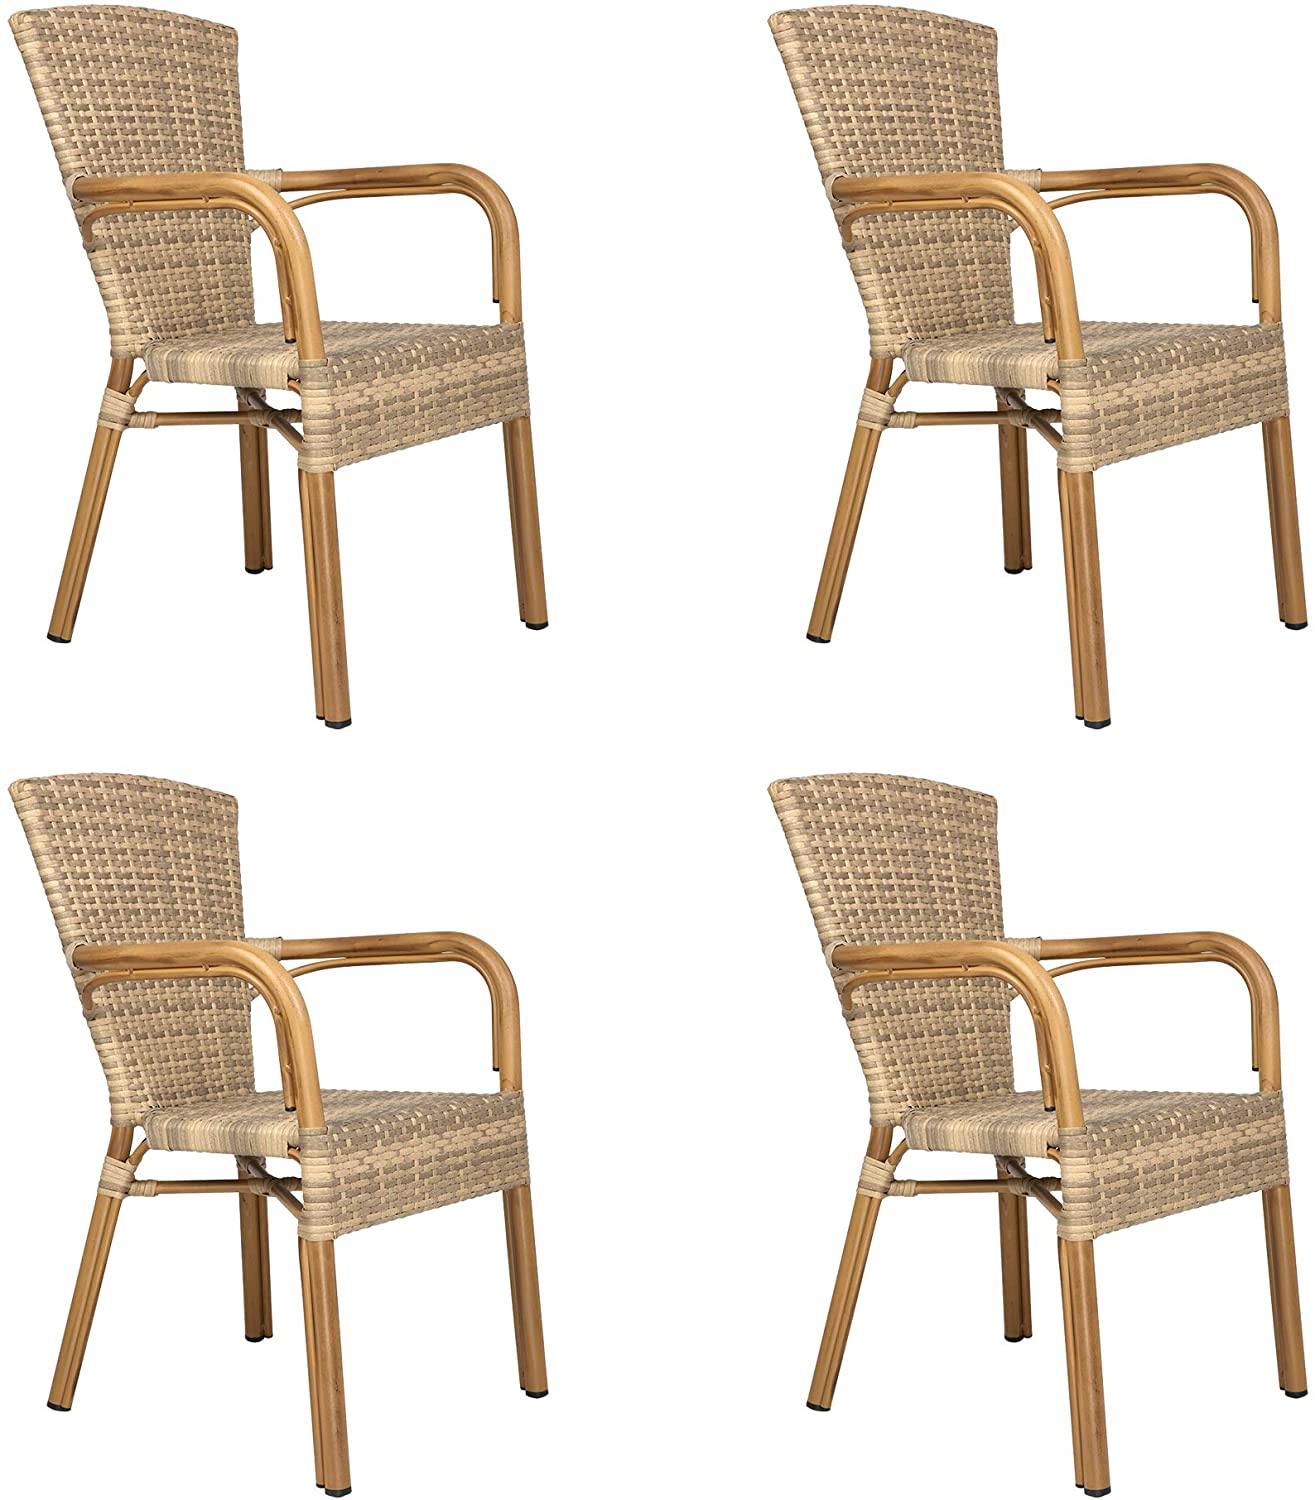 Patio Outdoor/Indoor Dining Chairs, Handmade PE Rattan Wicker Chair with Aluminum Alloy Frame, Set of 4, Black and Beige - Bosonshop